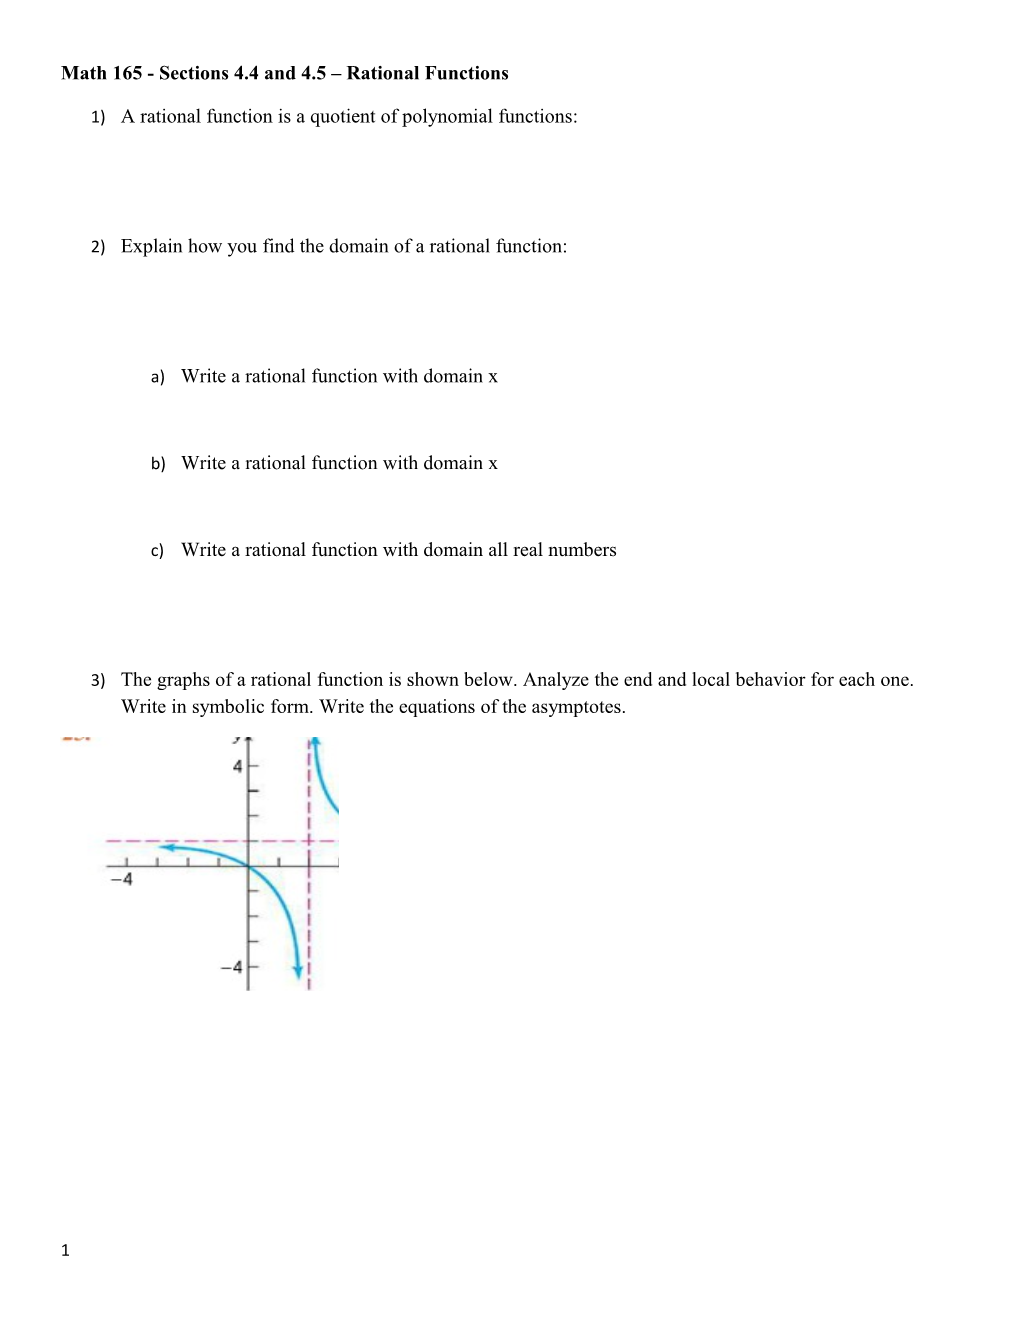 Math 165 - Sections 4.4 and 4.5 Rational Functions